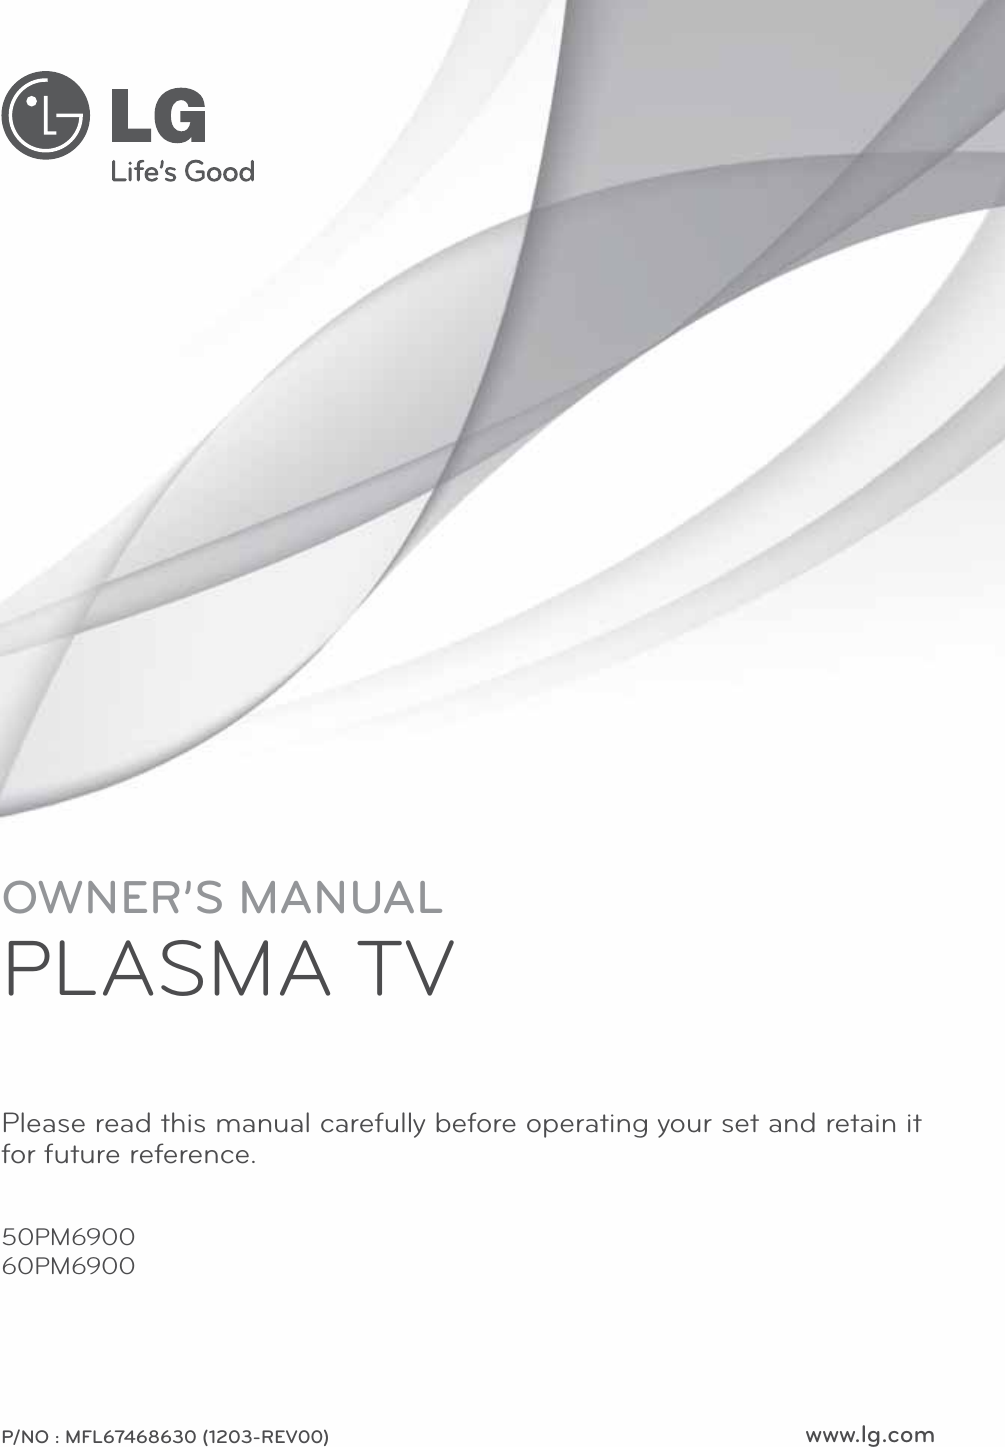 www.lg.comOWNER’S MANUALPLASMA TVPlease read this manual carefully before operating your set and retain it for future reference.P/NO : MFL67468630 (1203-REV00)50PM690060PM6900